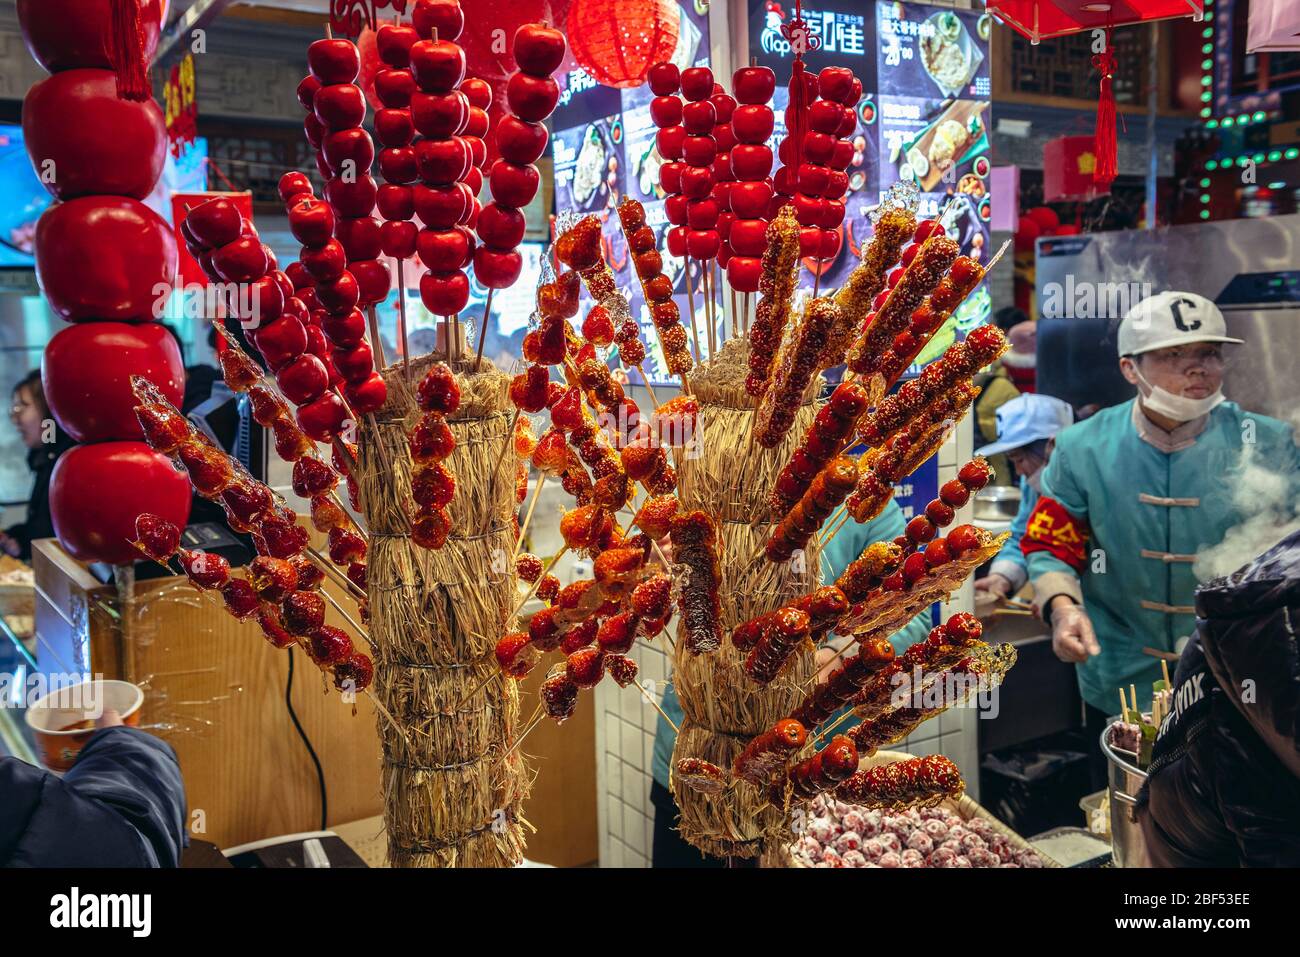 Candied fruits at Dashilan Commercial Street in area of Qianmen Street in Dashilan District of Beijing, China Stock Photo